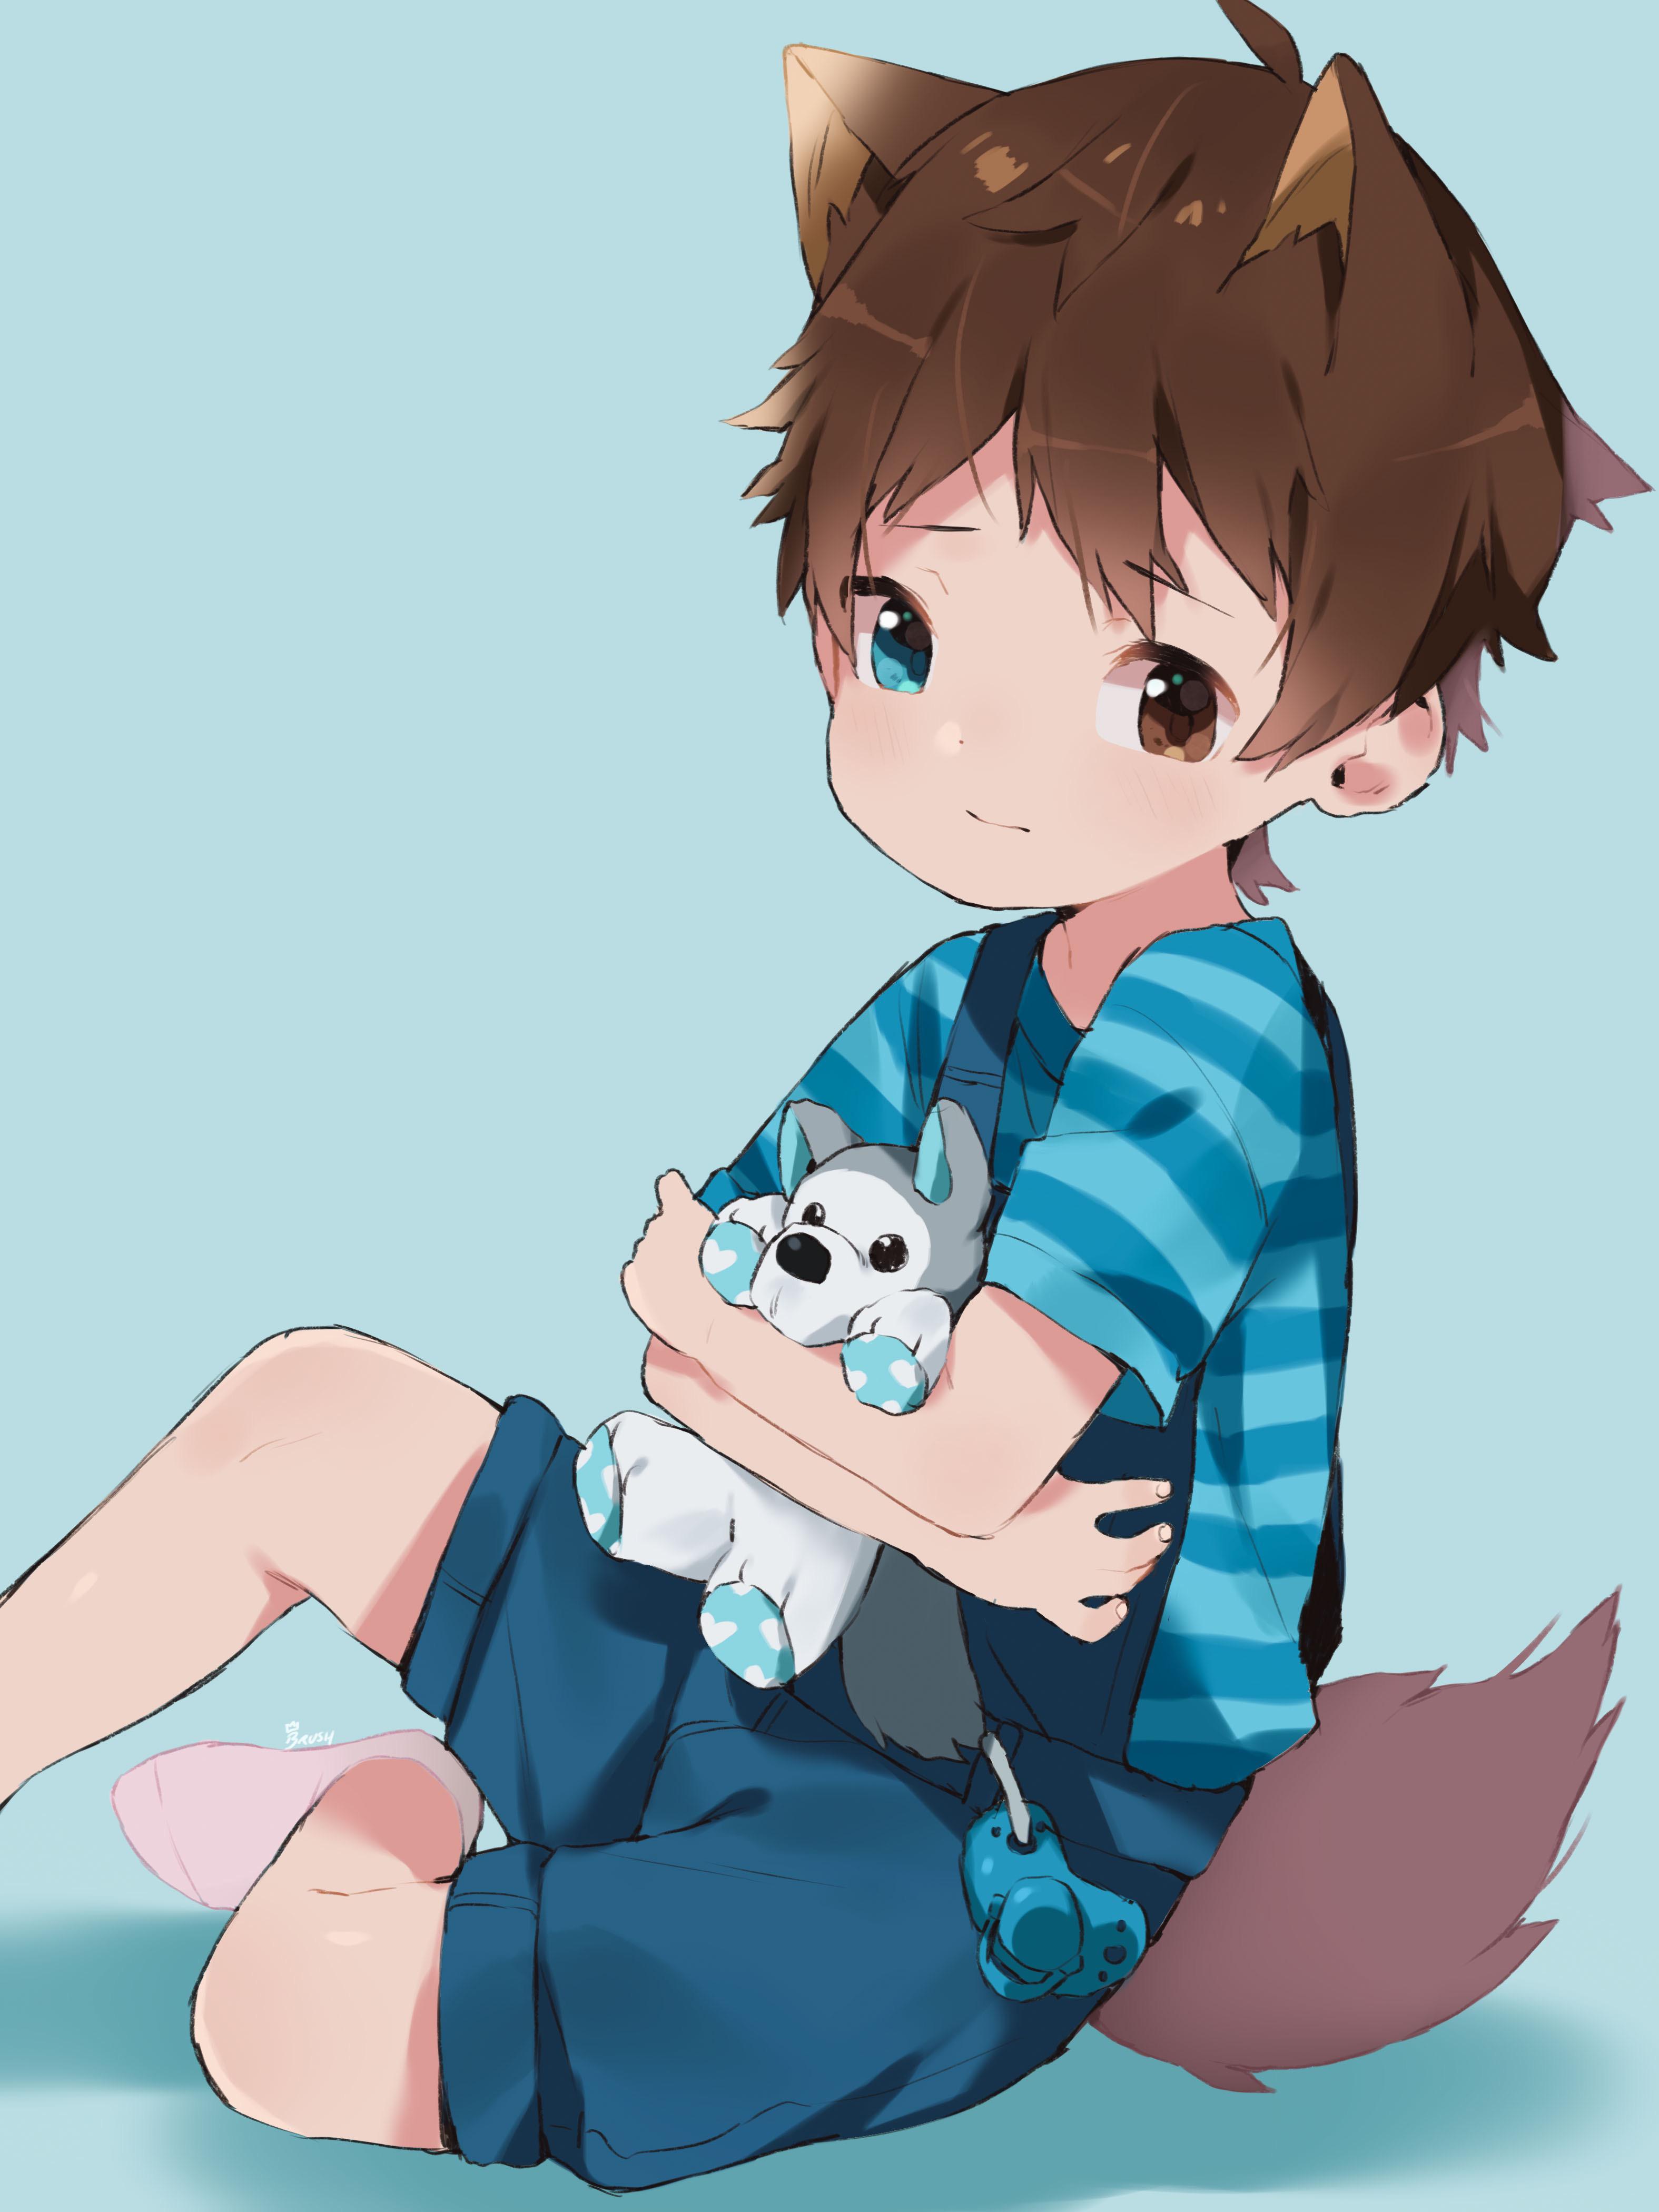 Boys can have stuffies too!插画图片壁纸